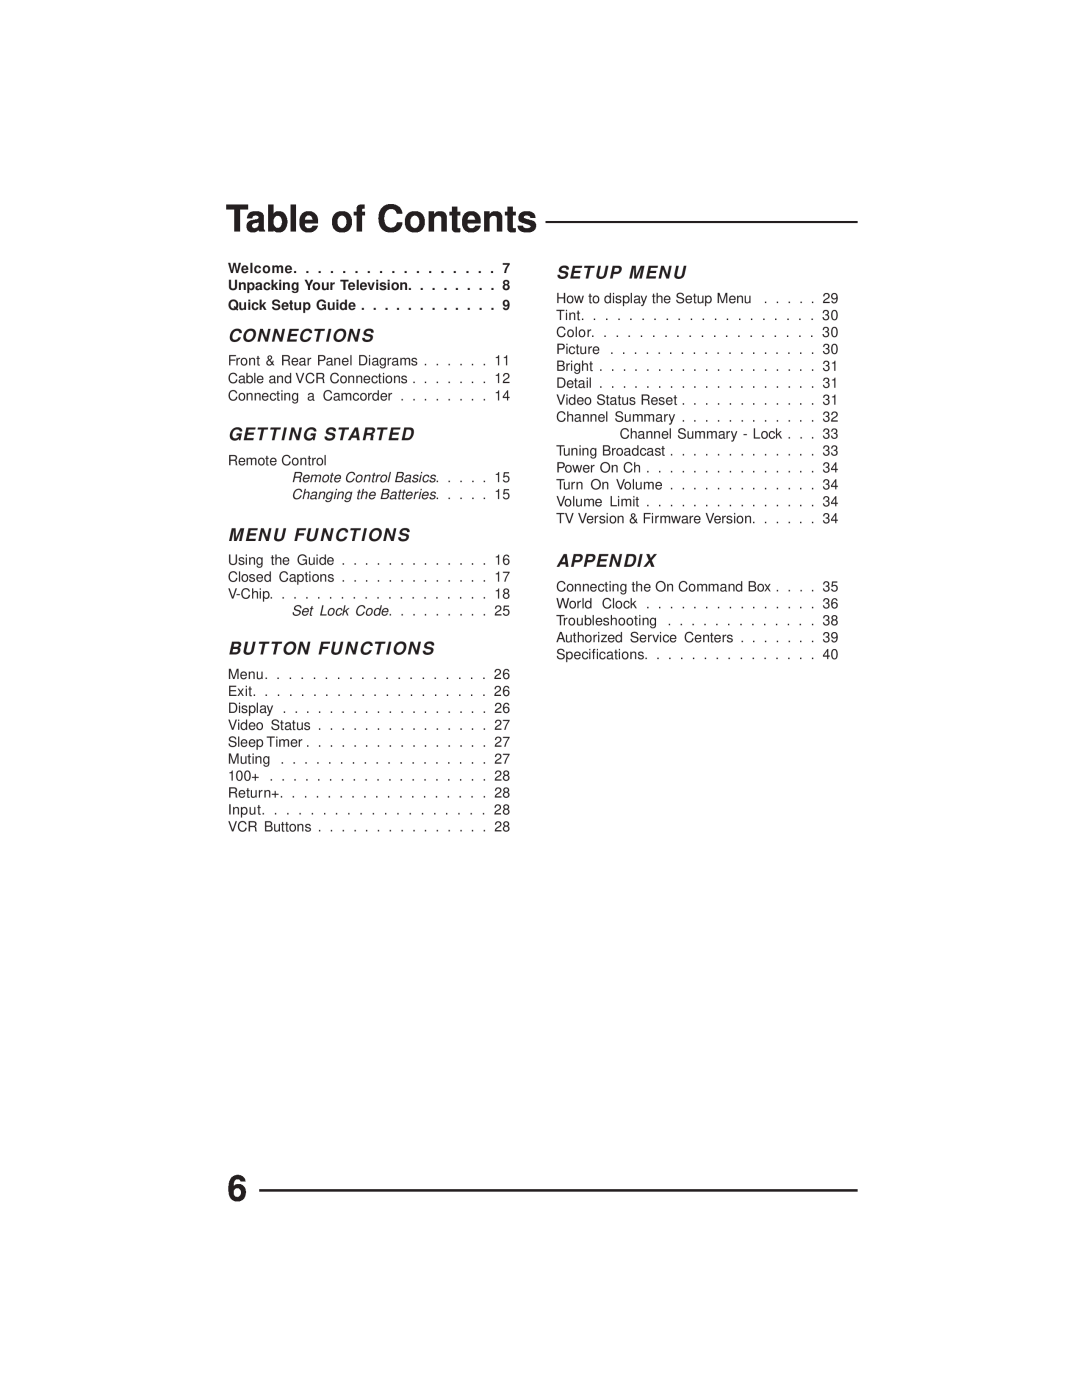 JVC AV-27GFH manual Table of Contents, Connections, Getting Started, Menu Functions, Button Functions, Setup Menu, Appendix 